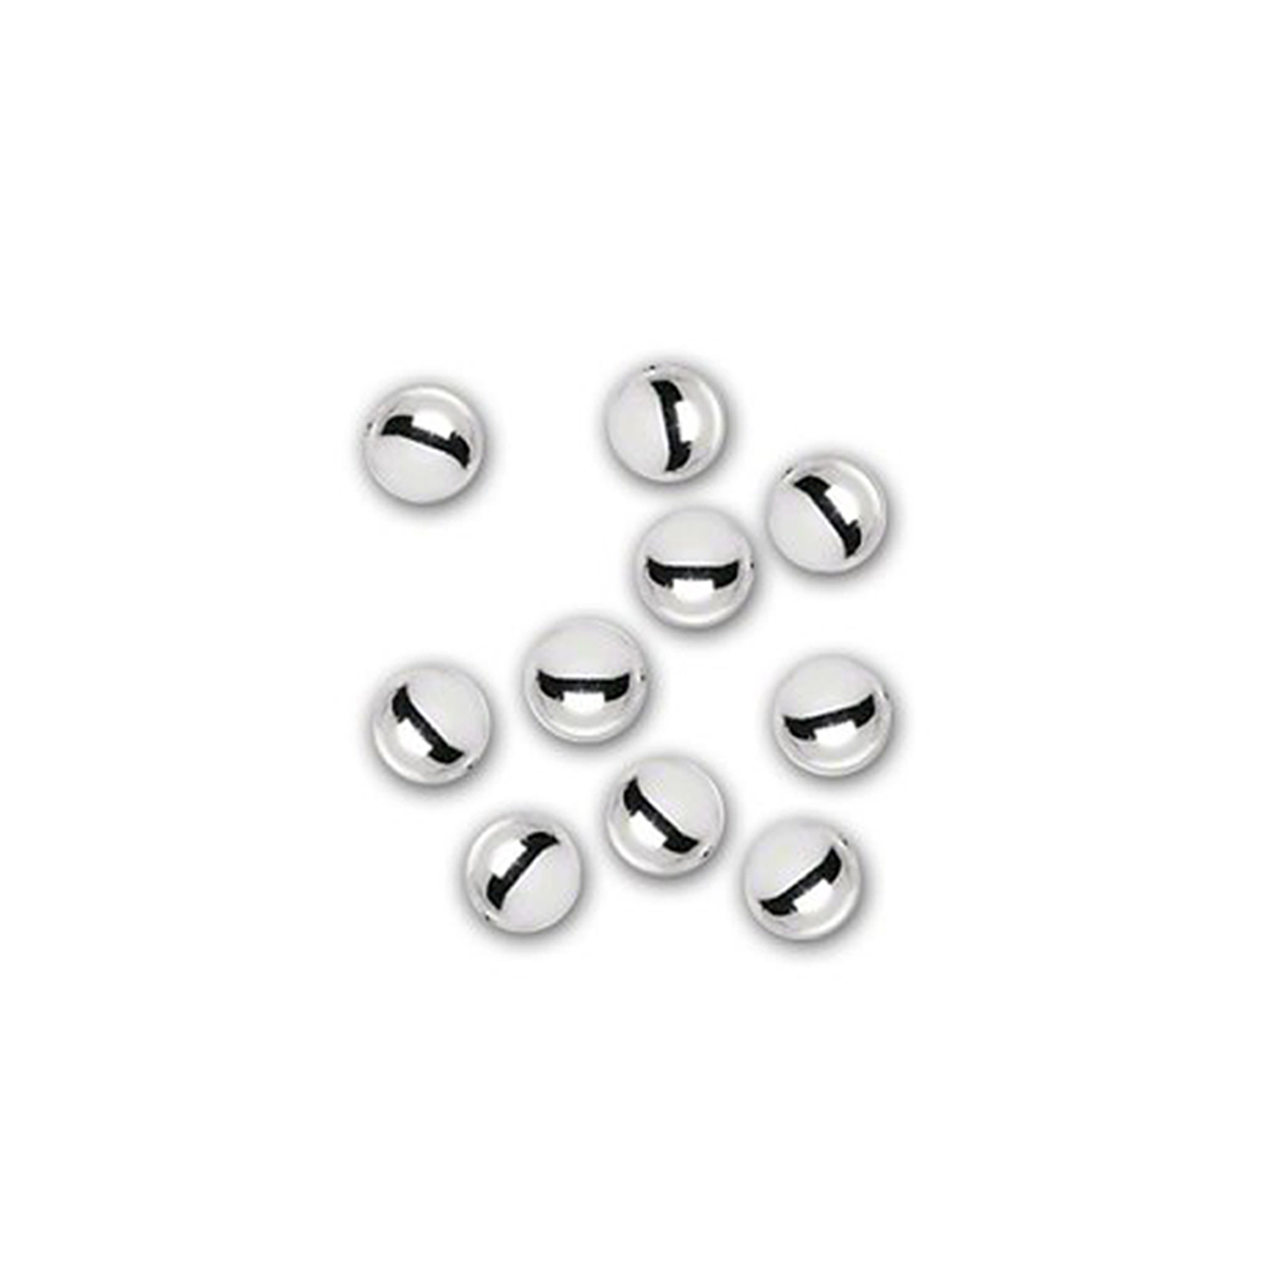 Sterling Silver Round Beads - 4mm - Pack of 10